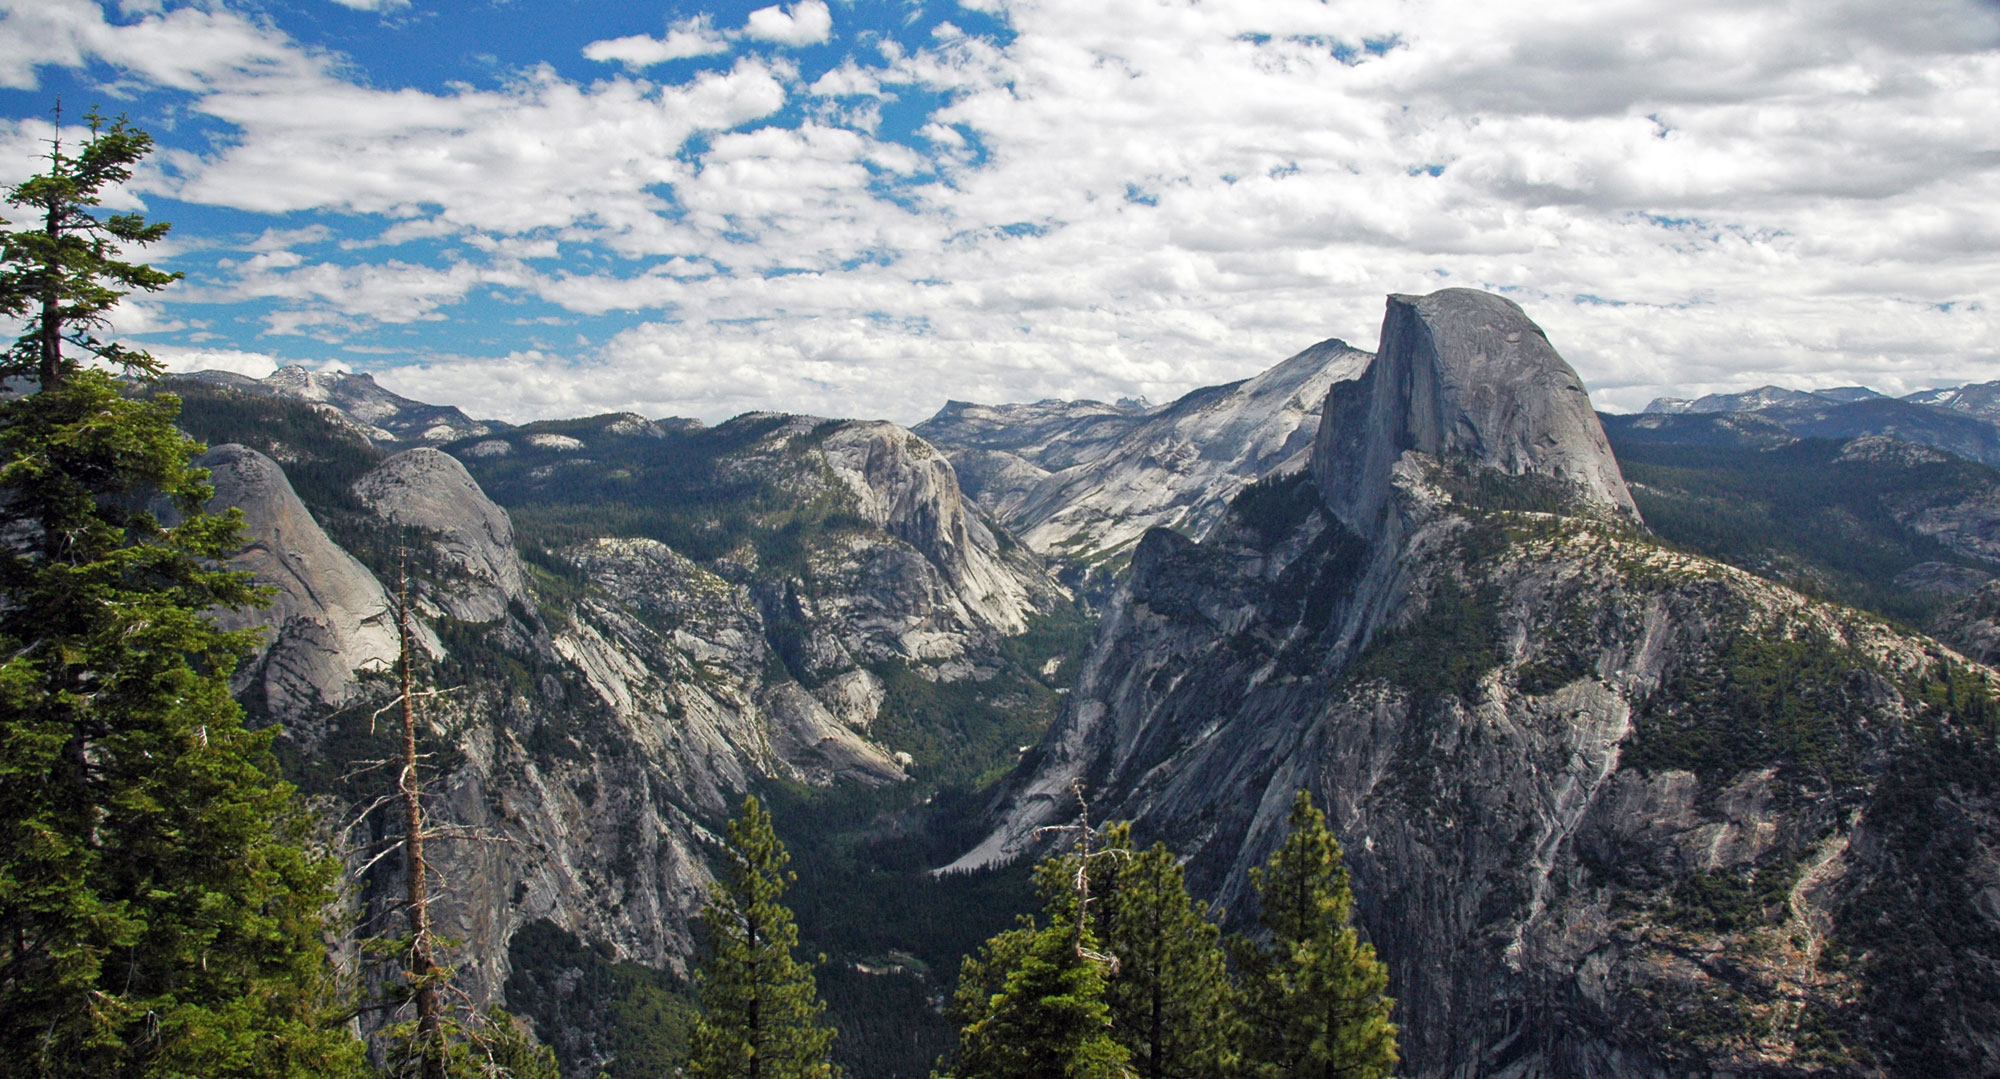 Photograph of Yosemite Valley taken from a high point in Yosemite National Park, California. The photo is taken looking down the valley with the peaks of the Sierra Nevada rising around it. Half Dome is in the center-right of the image.